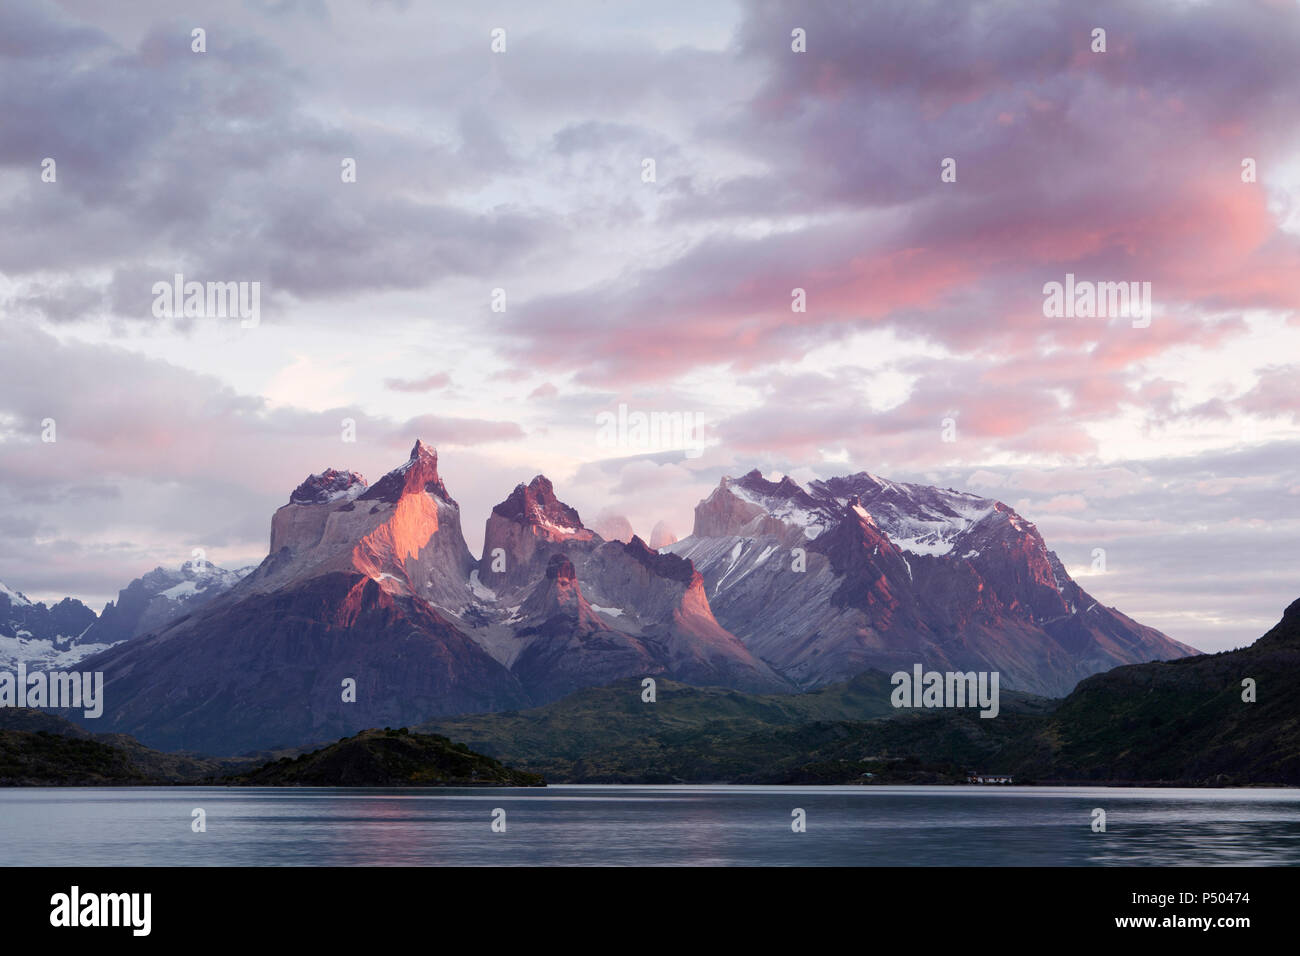 South America, Chile, Patagonia, Torres del Paine National Park, Cuernos del Paine from Lake Pehoe at sunrise Stock Photo